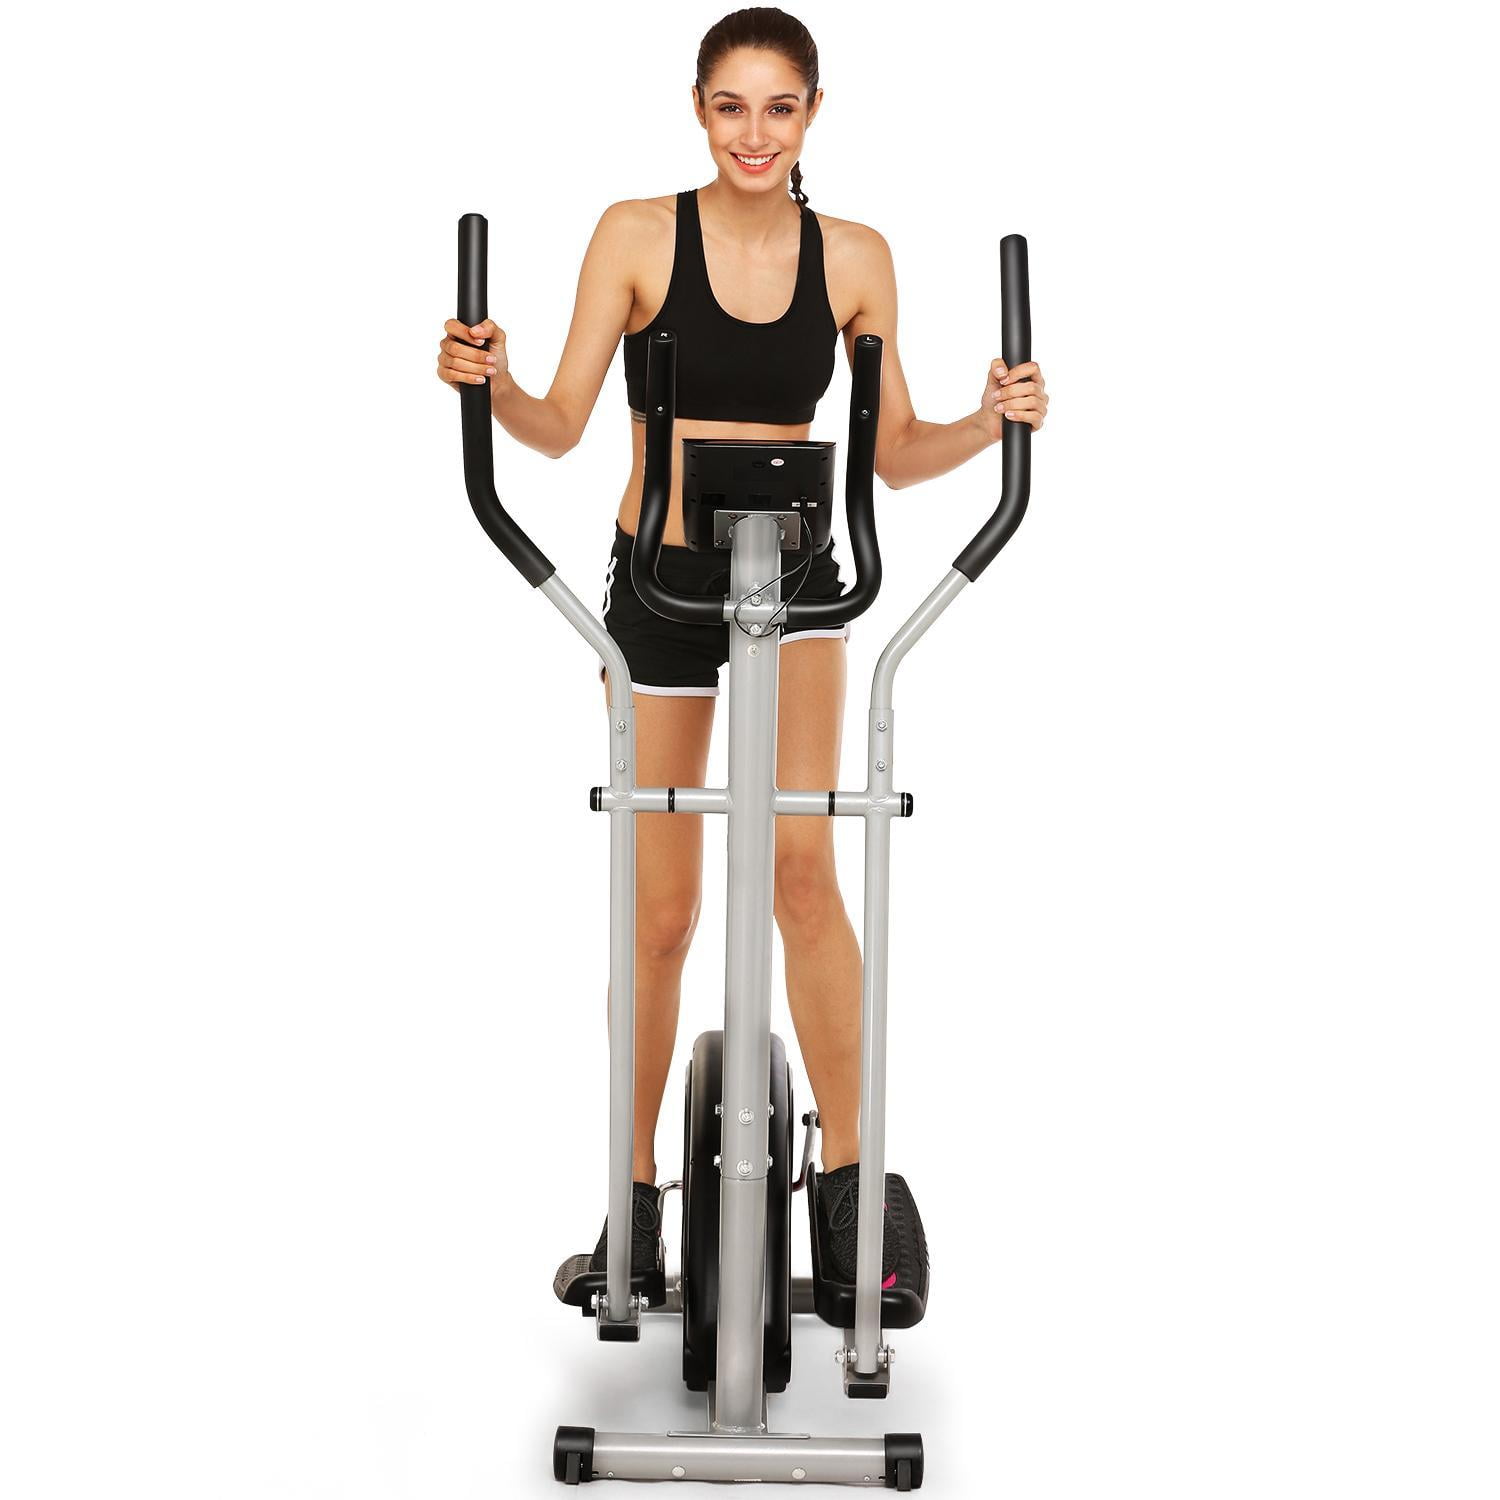 Eliptical Trainer Exercise Machine with Pulse Rate Grips and LCD Monitor ANCHEER Elliptical Machine Magnetic Smooth Quiet Driven for Home Using 